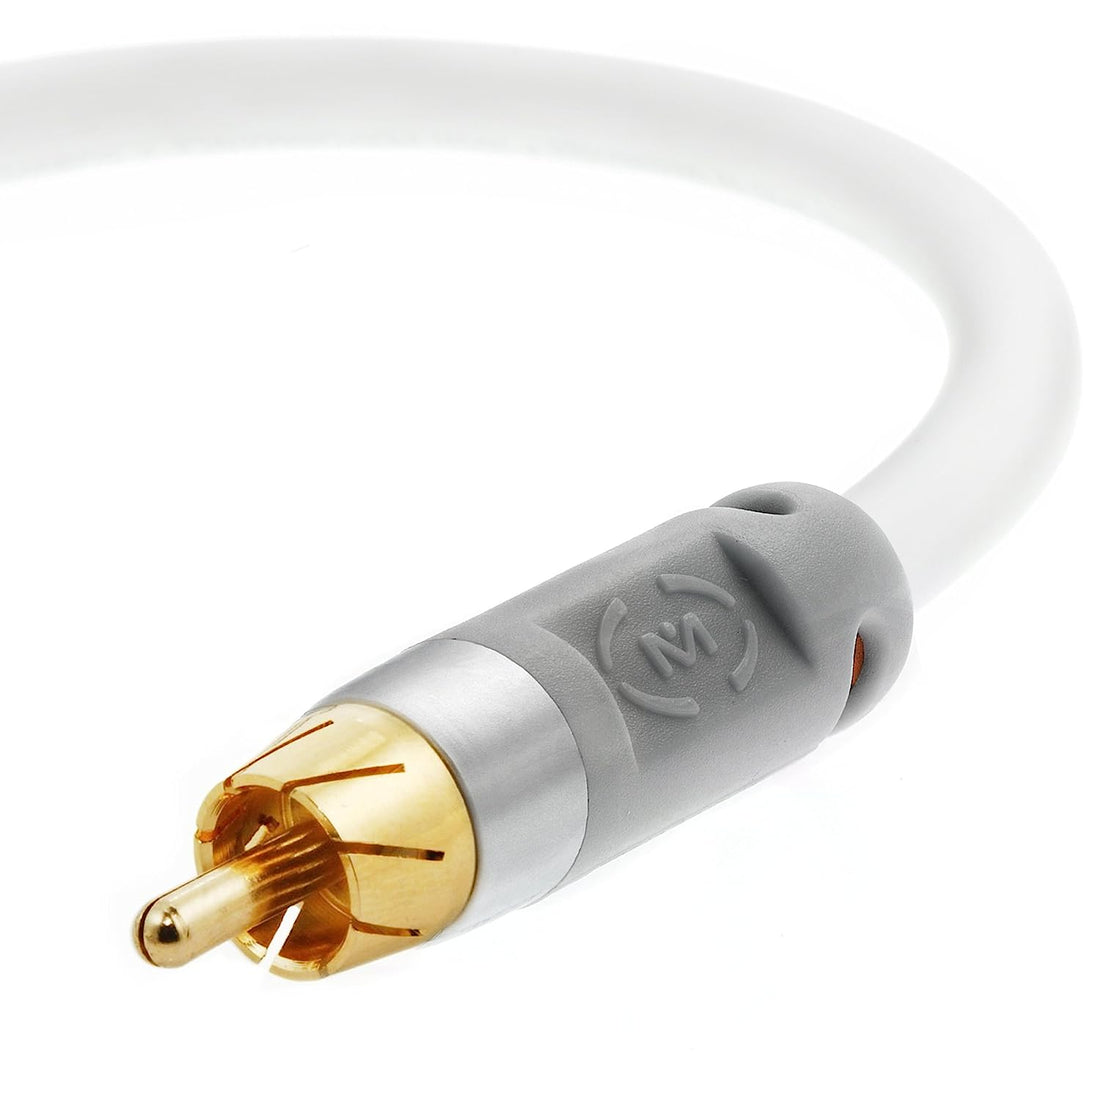 Mediabridge ULTRA Series Digital Audio Coaxial Cable (15 Feet) - Dual Shielded with RCA to RCA Gold-Plated Connectors - White